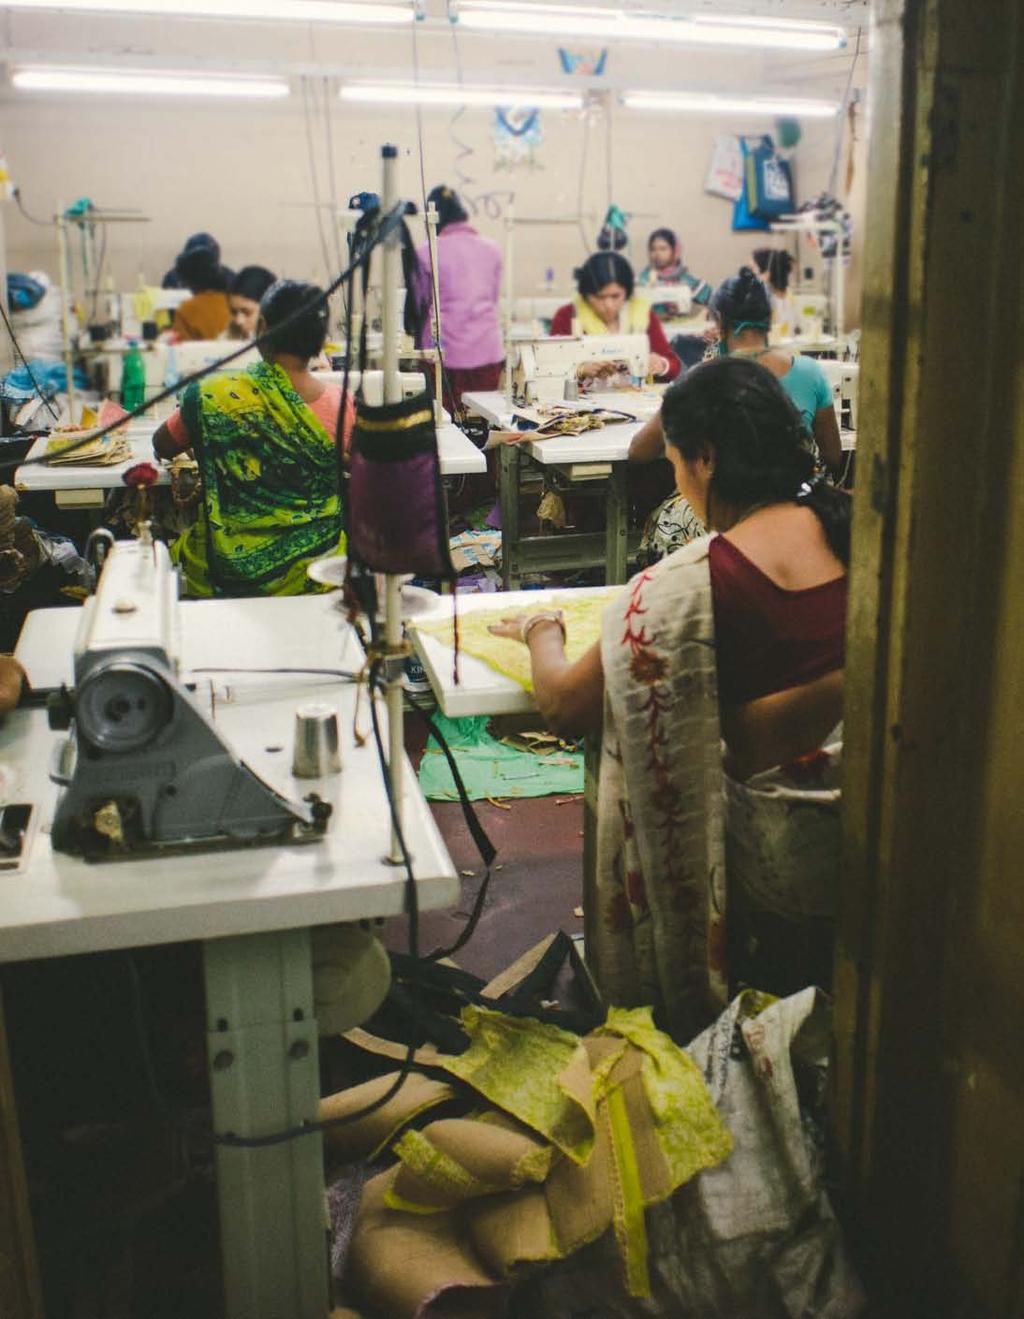 Freeset is a fair trade business offering employment to women trapped in Kolkata s sex trade. We make bags and tees, but our business is freedom!